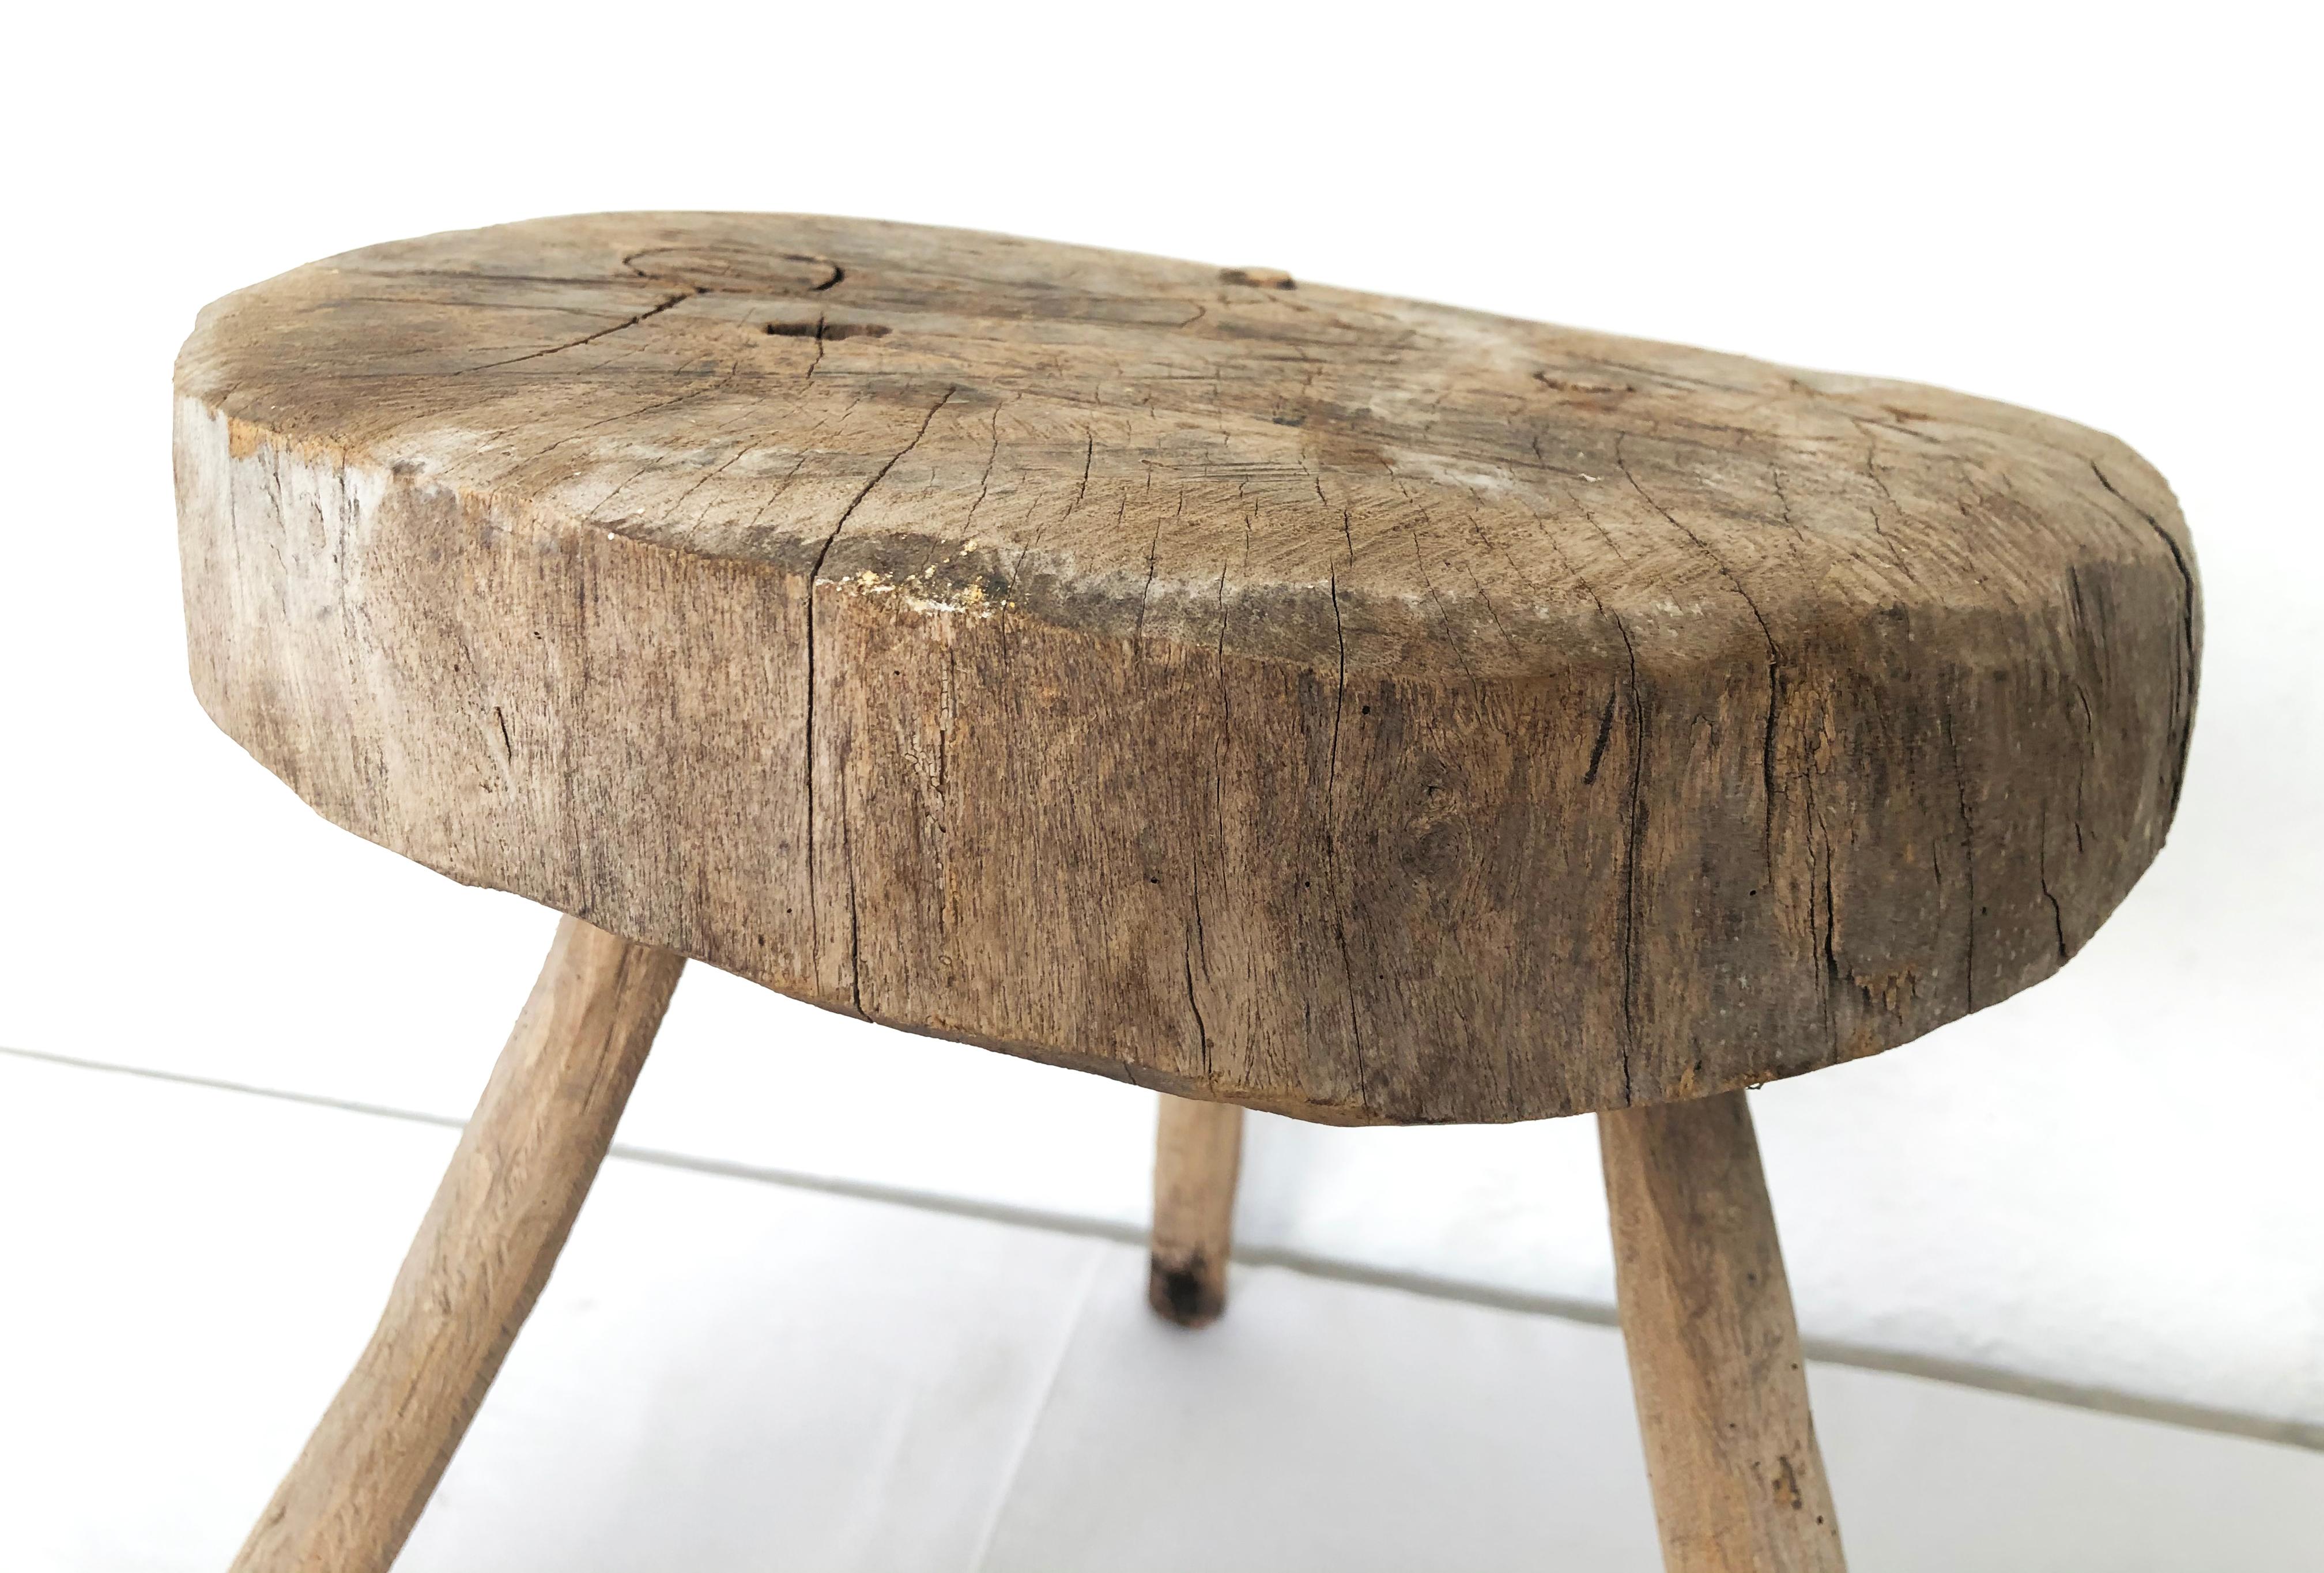 Hand-Carved Late 19th Century Mezquite Milking Wood Stool with Thick Round Top